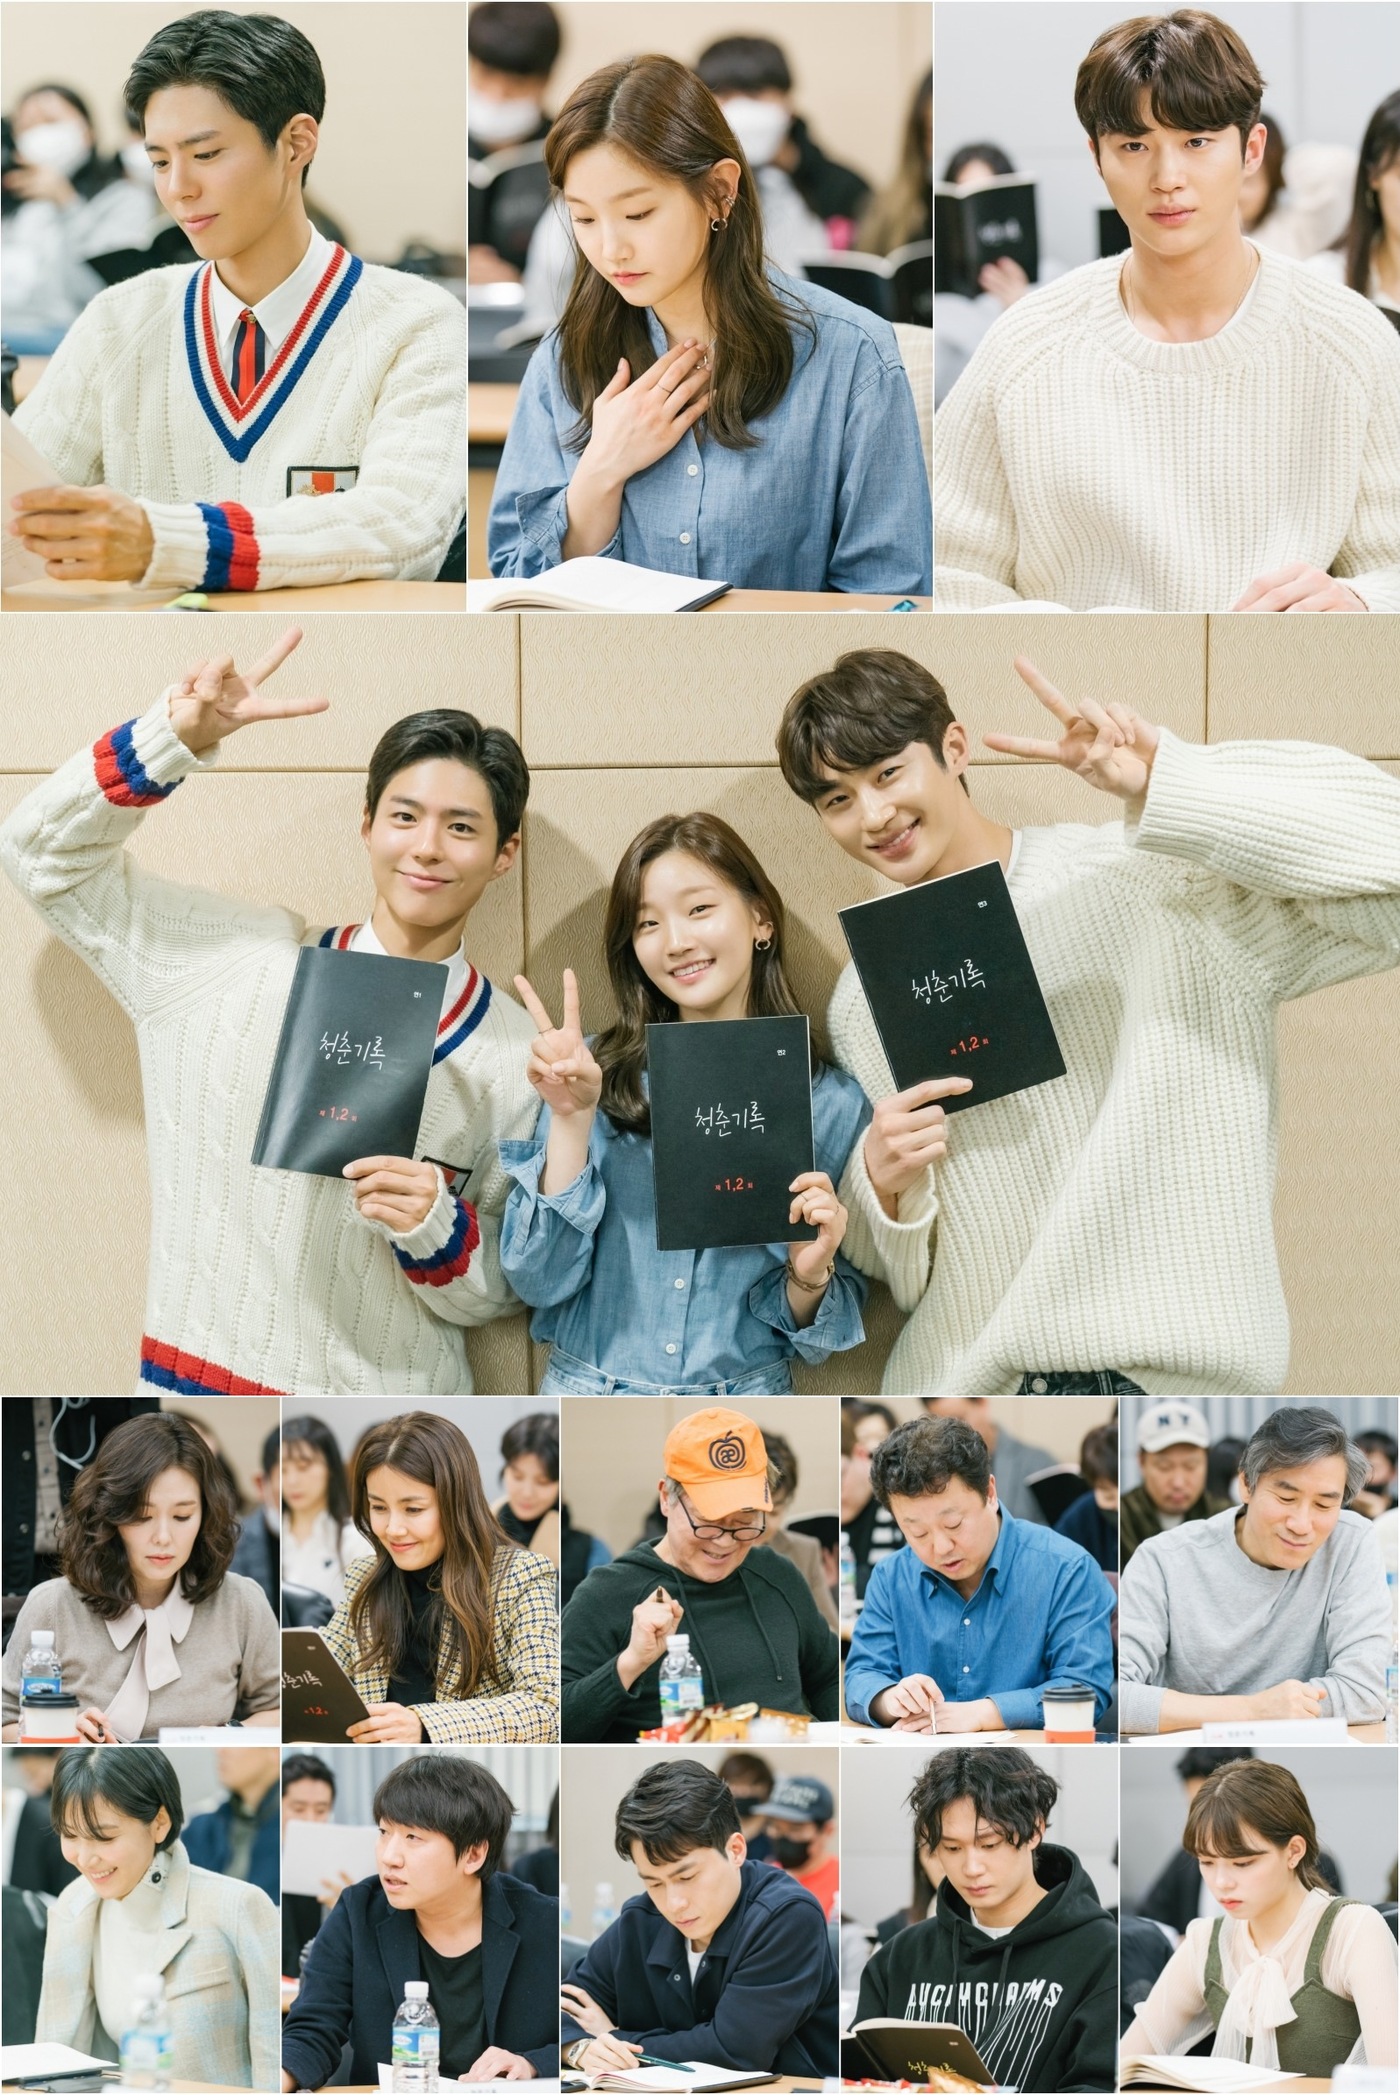 TVNs new monthly drama Youth Record (playplay by Ha Myung-hee/director An Gil-ho/Produced Fan Entertainment, Studio Dragon), which is scheduled to be broadcasted first in September, draws a growth record of young people who try to achieve dreams and love without despairing on the wall of reality.The hot record of those who go straight to their dreams in their own way, the youth of this era, which has become a luxury even to dream, gives excitement and sympathy.Director An Gil-ho, who showed the power of meticulous and delicate directing through Secret Forest, Memories of Alhambra Palace and WATCHER, and writer Ha Myung-hee, who melts realistic Sight into warm and emotional stories such as Doctors and Love Temperature, thrills drama fans.The script reading was directed by Ahn Gil-ho and Ha Myung-hee, Park Bo-gum, Park So-dam, Byeon Wooseok, Ha Hee-ra, Shin Ae-ra, Han Jin-hee, Park Soo-young, Seo Sang Won, Shin Dong-mi, Lee Chang-hoon, Lee Jae-won, Veteran Acting high school students and popular youth actors who gave confidence even if they heard only names such asoo-hyun and Joe-Jeong played an Acting heat.Prior to the full-scale start, director Ahn Gil-ho said, I started to give good influence. I hope that I can give a sound through the growth of youth.The breath of the actors who will write down a page of brilliant youth shone from the first meeting.Park Bo-gum, who does not need to explain first, captivated Sight at once with a perfect meltdown in a passionate realist youthful Hye-joon.He made a sense of reality with detailed Acting, and he led the atmosphere by skillfully controlling the completeness of emotions.Sa Hye-joons straight-up figure, which runs fiercely to achieve his dream of learning by stepping into reality, adds charm to Park Bo-gums unique positive energy.Park Bo-gum said, I will work hard to make this youth beautifully recorded and remembered at this time that will not come back now like the title of Youth Record.Park So-dam showed a break-up acting transformation into a youthful youth stable that goes straight to the dream.The makeup artist with the skill of Manleb in social life has unleashed the charm of An Jeong-ha.When I am tired and tired, I am a fan of Sa Hye-joon who is comforted by morality and emits lovely energy and gives a pleasant smile.The breath of Park Bo-gum and Park So-dam, which had been expected above all, was perfect.The meeting between fan and honey, and how the two people with this special relationship will transform themselves already stimulate expectations.The rising youth star Byeon Wooseok took on the role of Won Hae Hyo, a youth who wanted to be recognized for his efforts, and raised the tension.Won Hae Hyo is a person who can not stand the Sight that he is benefiting from the family because he does his best if he likes it.Byeon Wooseok, who showed the character and perfect synchro rate as a model, doubled the charm of the character by drawing a three-dimensional picture of Won Hae-hyo with a strong desire to evaluate a fair and fair evaluation from a warm and gentle appearance.Especially, the chemistry with the special Friend Park Bo-gum, which has developed the same dream, warms the viewers and raises the expectation of the romance that the two will show.Acting high school students who are responsible for the reality and laughter of the drama are another point of observation.Ha Hee-ra and Shin Ae-ra, who are active as believe in the legend youth star, have released the decomposing drama and drama charm with skillful acting as the mother of Sa Hye-joon and Won Hae-hyo respectively.I had a son who dreamed the same dream, but I laughed and sympathized with the appearance of two mothers with so different values.Han Jin-hee, who conveyed his impression that he would watch the pain of youth, took the center of gravity of the disassembly drama with Sa Hye-joons grandfather.Especially, the warm synergy of Park Bo-gum and Han Jin-hee, who met as grandchildren and grandfathers who are strong for each other, will attract viewers.Here, Park Soo-young of Sae Hye-joons father, Sae Young-nam, and Seo Sang-won of Won Tae-kyung, the father of Won Hae-hyo, also added a heavy presence.There was also a feast of characters that would bring liveliness.Shin Dong-mi, a manager who burns his passion to make Sa Hye-joon an actor, caused a laugh with a sultry act.Lee Chang-hoon, who added immersion with detailed acting, took on Lee Tae-soo, the model agency representative who filled his self-interest.Lee Jae-won, Sa Hye-joons brother, Sa Hye-joon, and Kwon Soo-hyun, who is divided into Friend of Sa Hye-joon and Won Hae-hyo and Kim Jin-woo, who dreams of becoming a photographer, and Joe-Jeong, who plays the elite Won Hae-na,In addition, actors who do not need explanations such as Jung Min-sung, Yang So-min, Jo Ji-seung, Lim Ki-hong, Park Se-hyun, and Jang I-jung were immersed in their characters and laughed and rang the crowd.Its scheduled for broadcast in September.